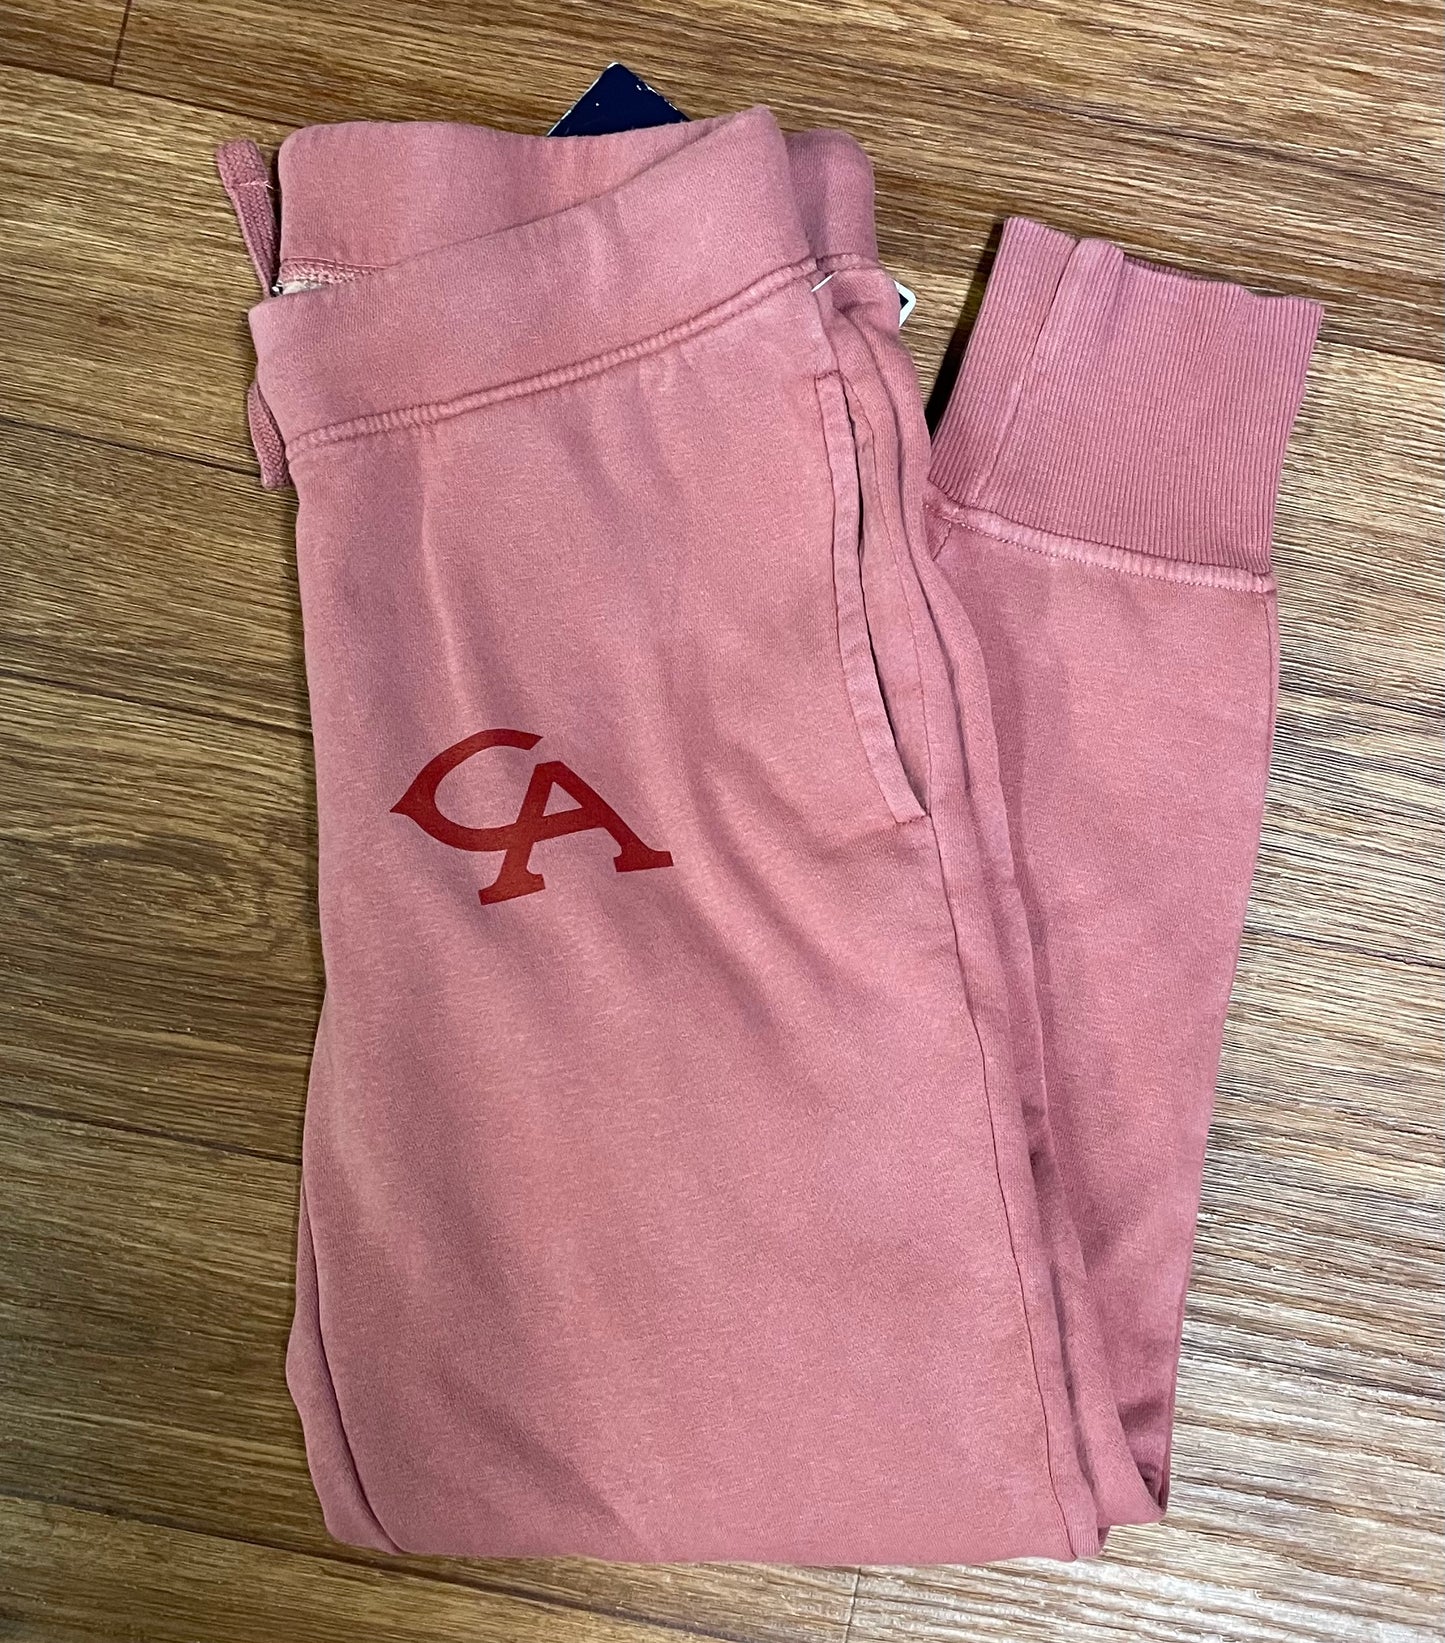 Clearance Columbia Academy Joggers